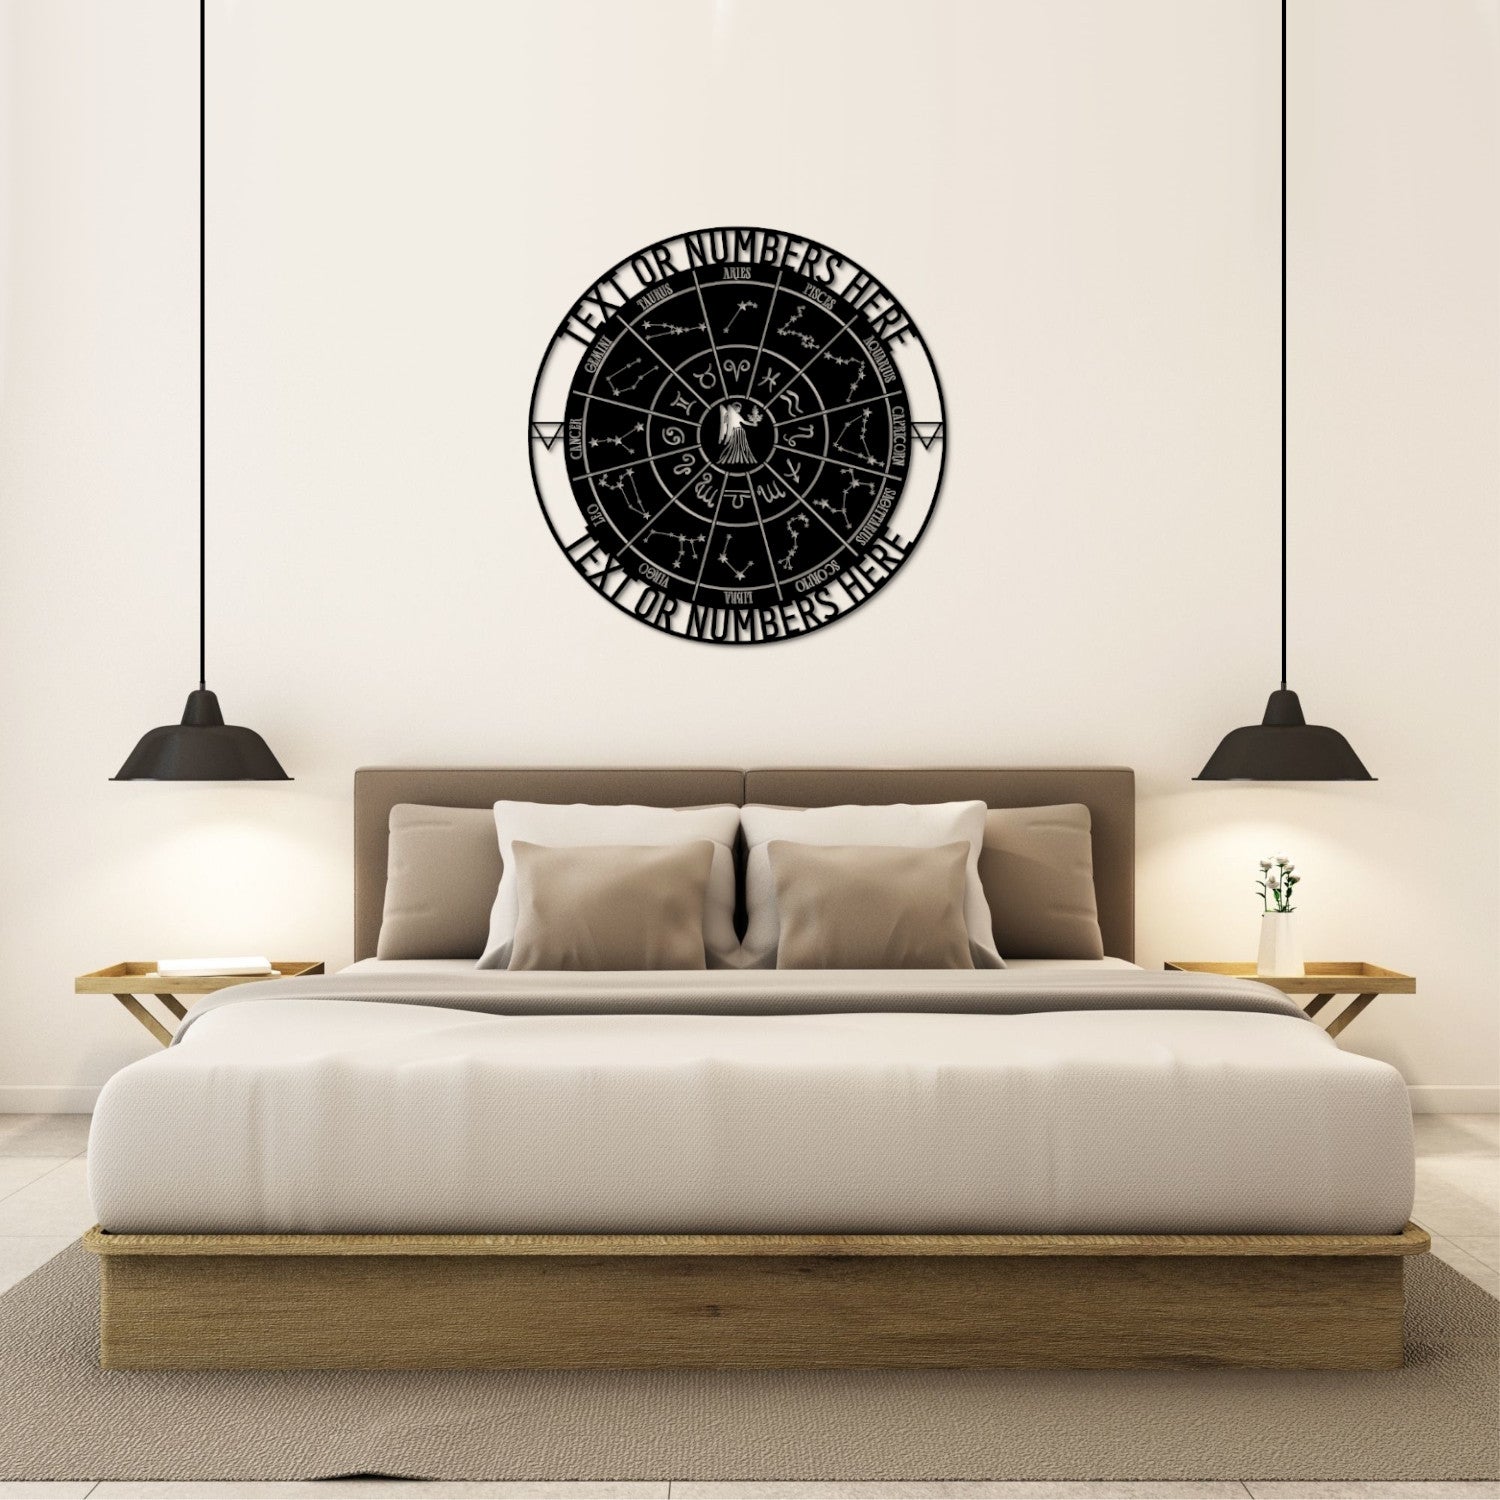 Personalized Virgo Zodiac Wheel Name Metal Sign | Custom Made Astrology Wall Decor | Celestial Gifts | Decorative Virgo Star Sign Hanging